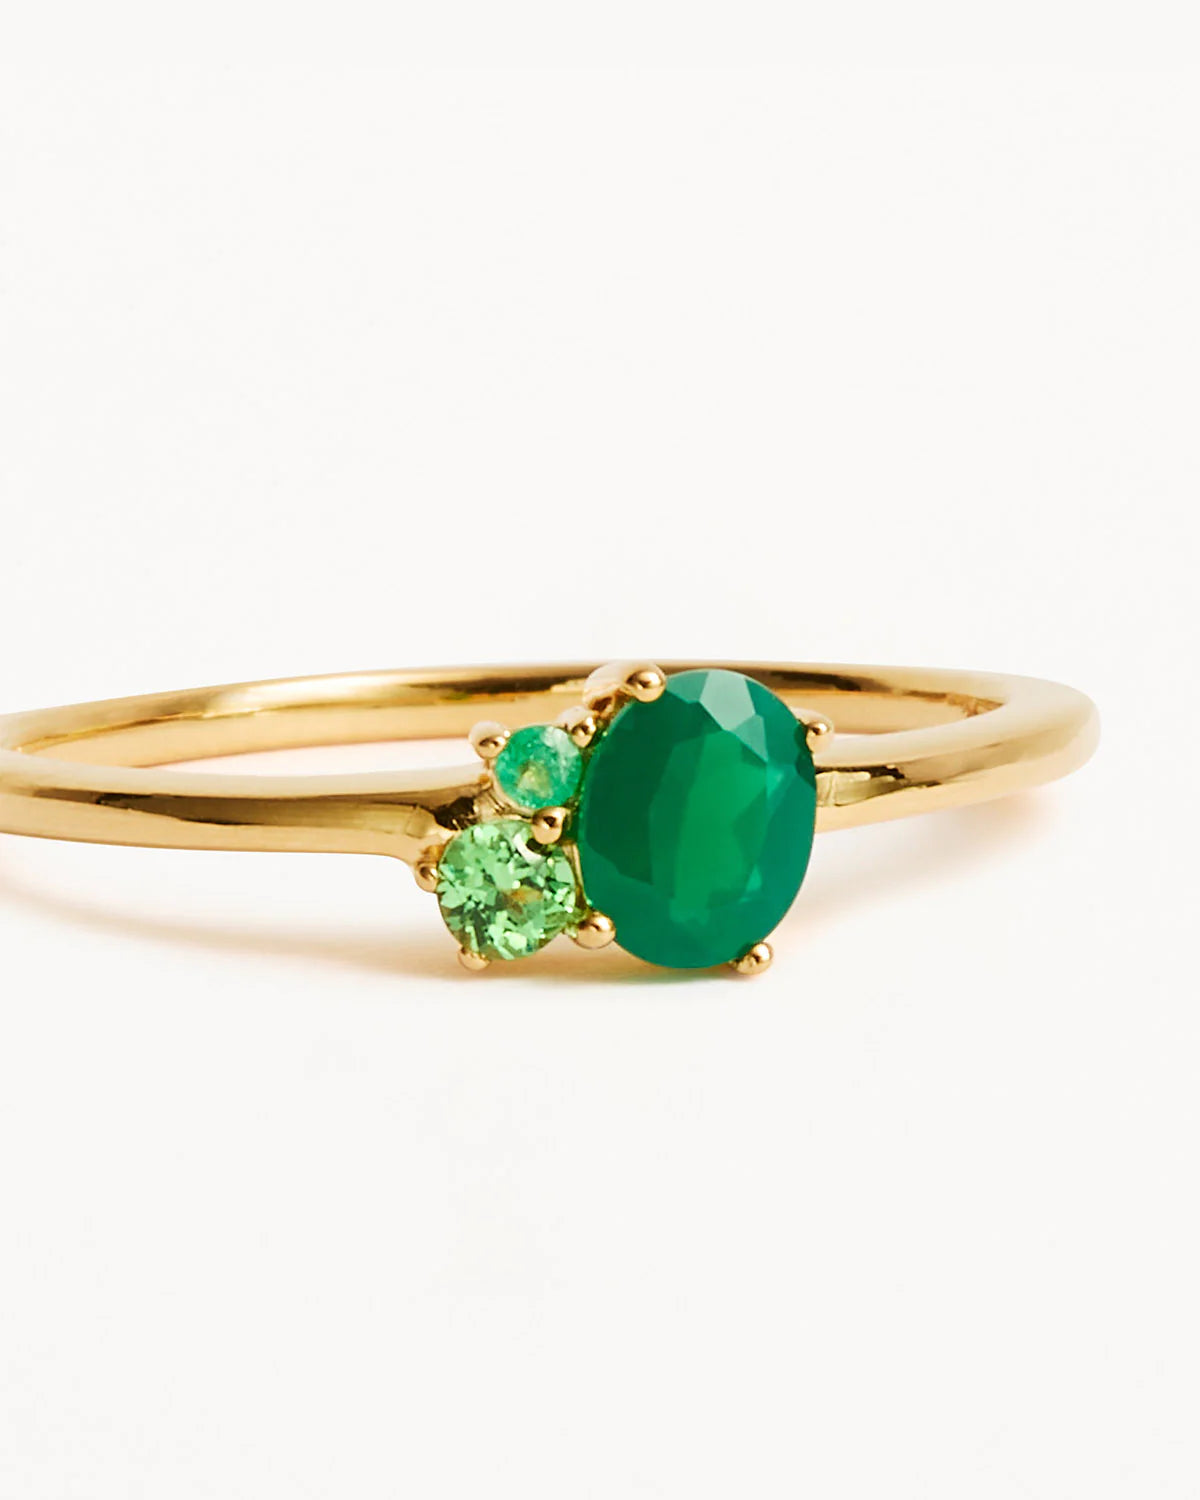 KINDRED RING EMERALD - 18K GOLD VERMEIL - BY CHARLOTTE